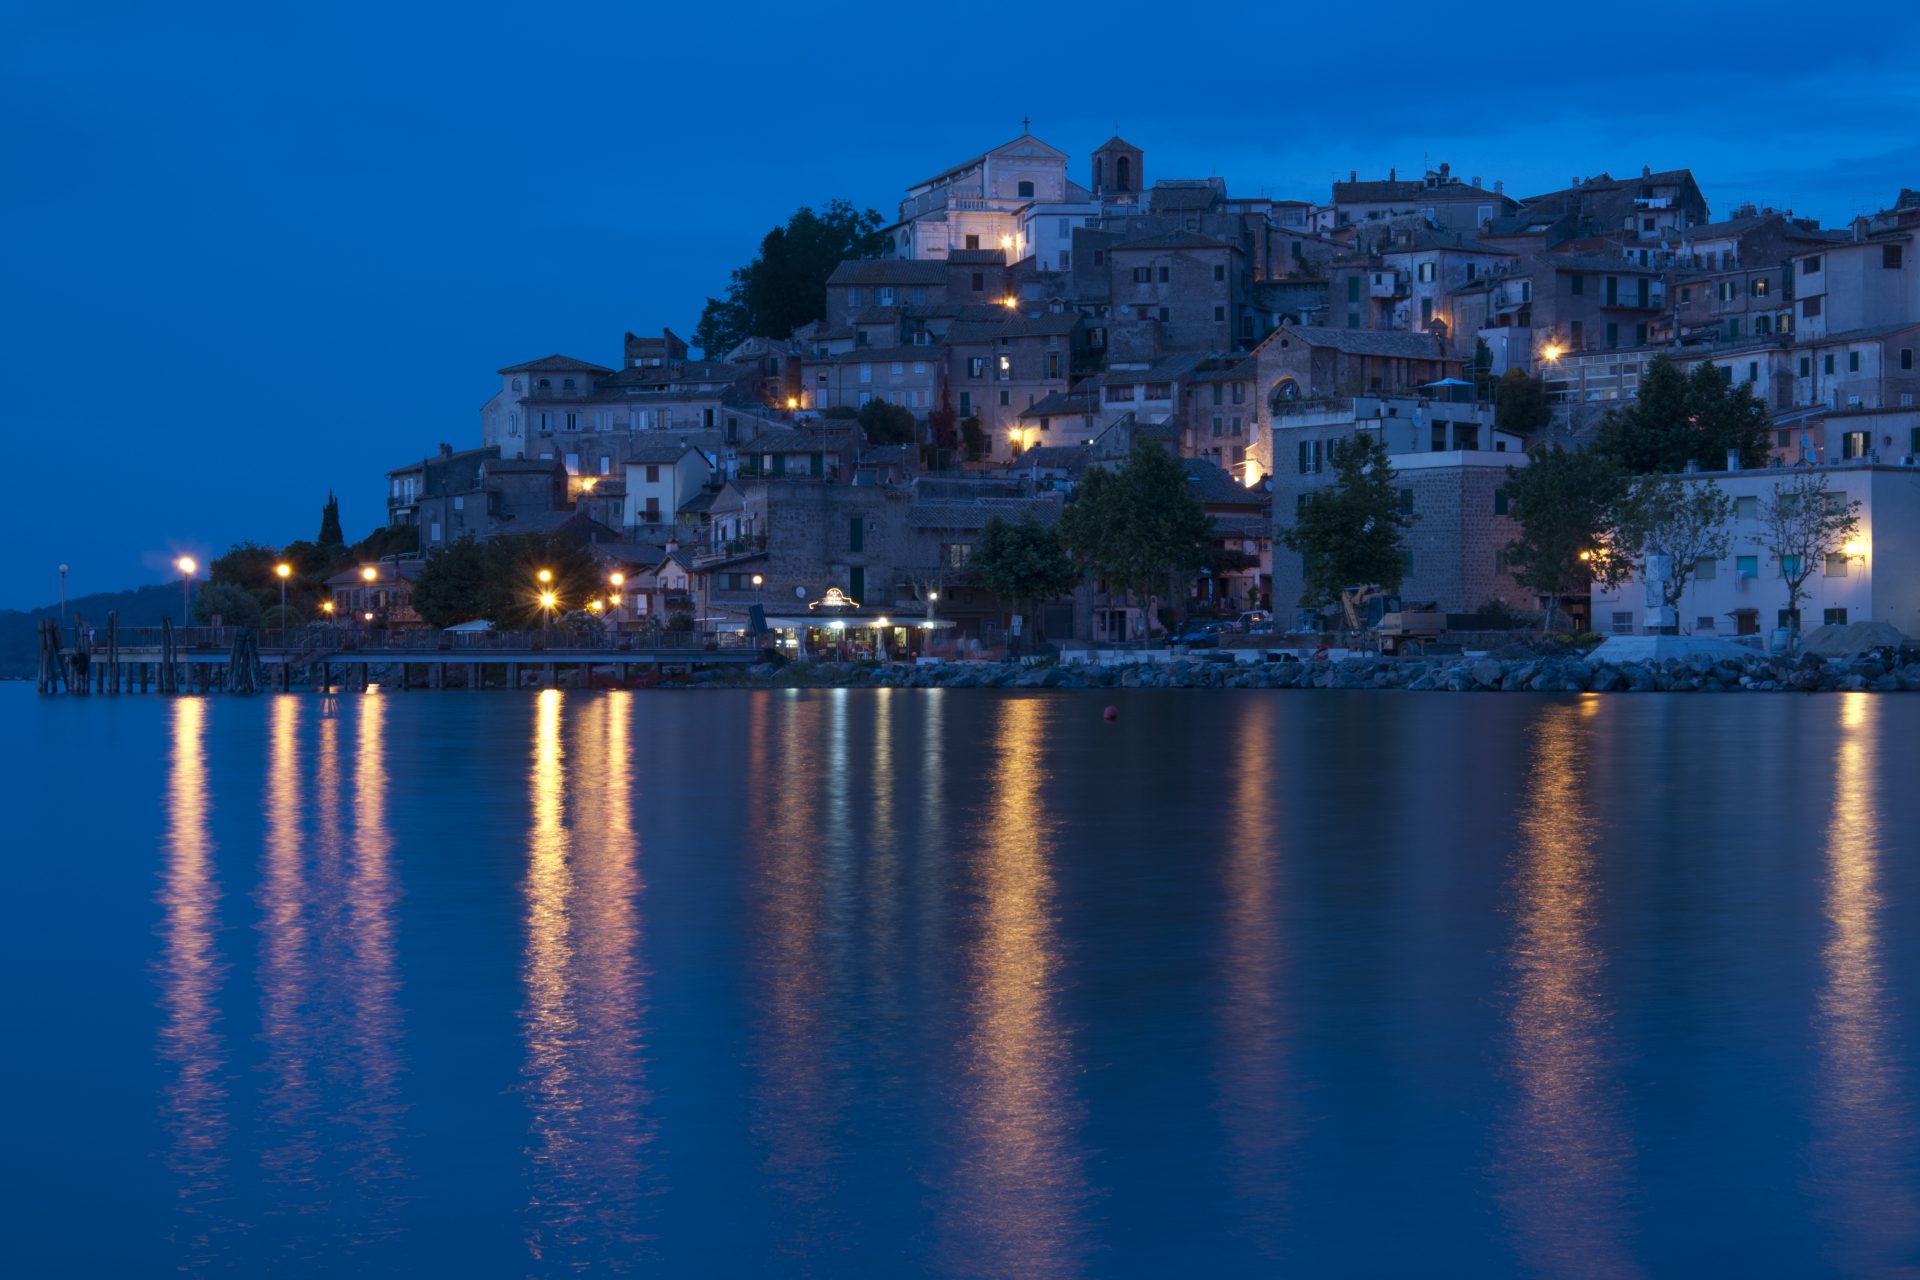 <p>This splendid village is reflected in the waters of Lake Bracciano - where it is possible to swim! It is located just over 30 km (18.5 miles) from the capital and ideal for day trip. The town offers postcard views from any side you look at it. Not to be missed, especially at sunset.</p>